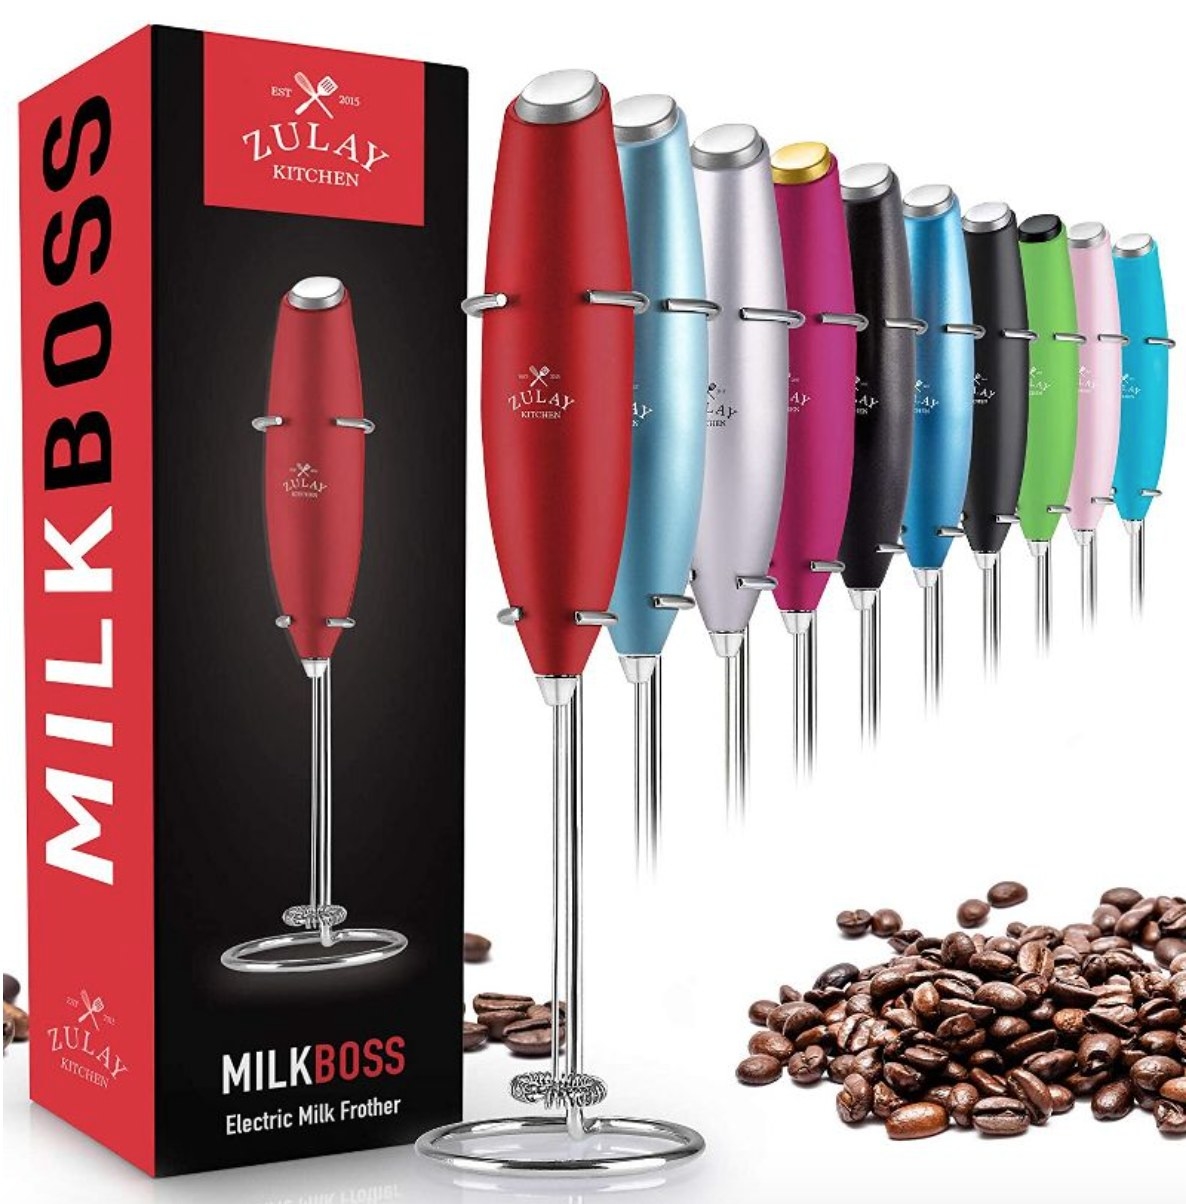 the range of colors of the milk frothers